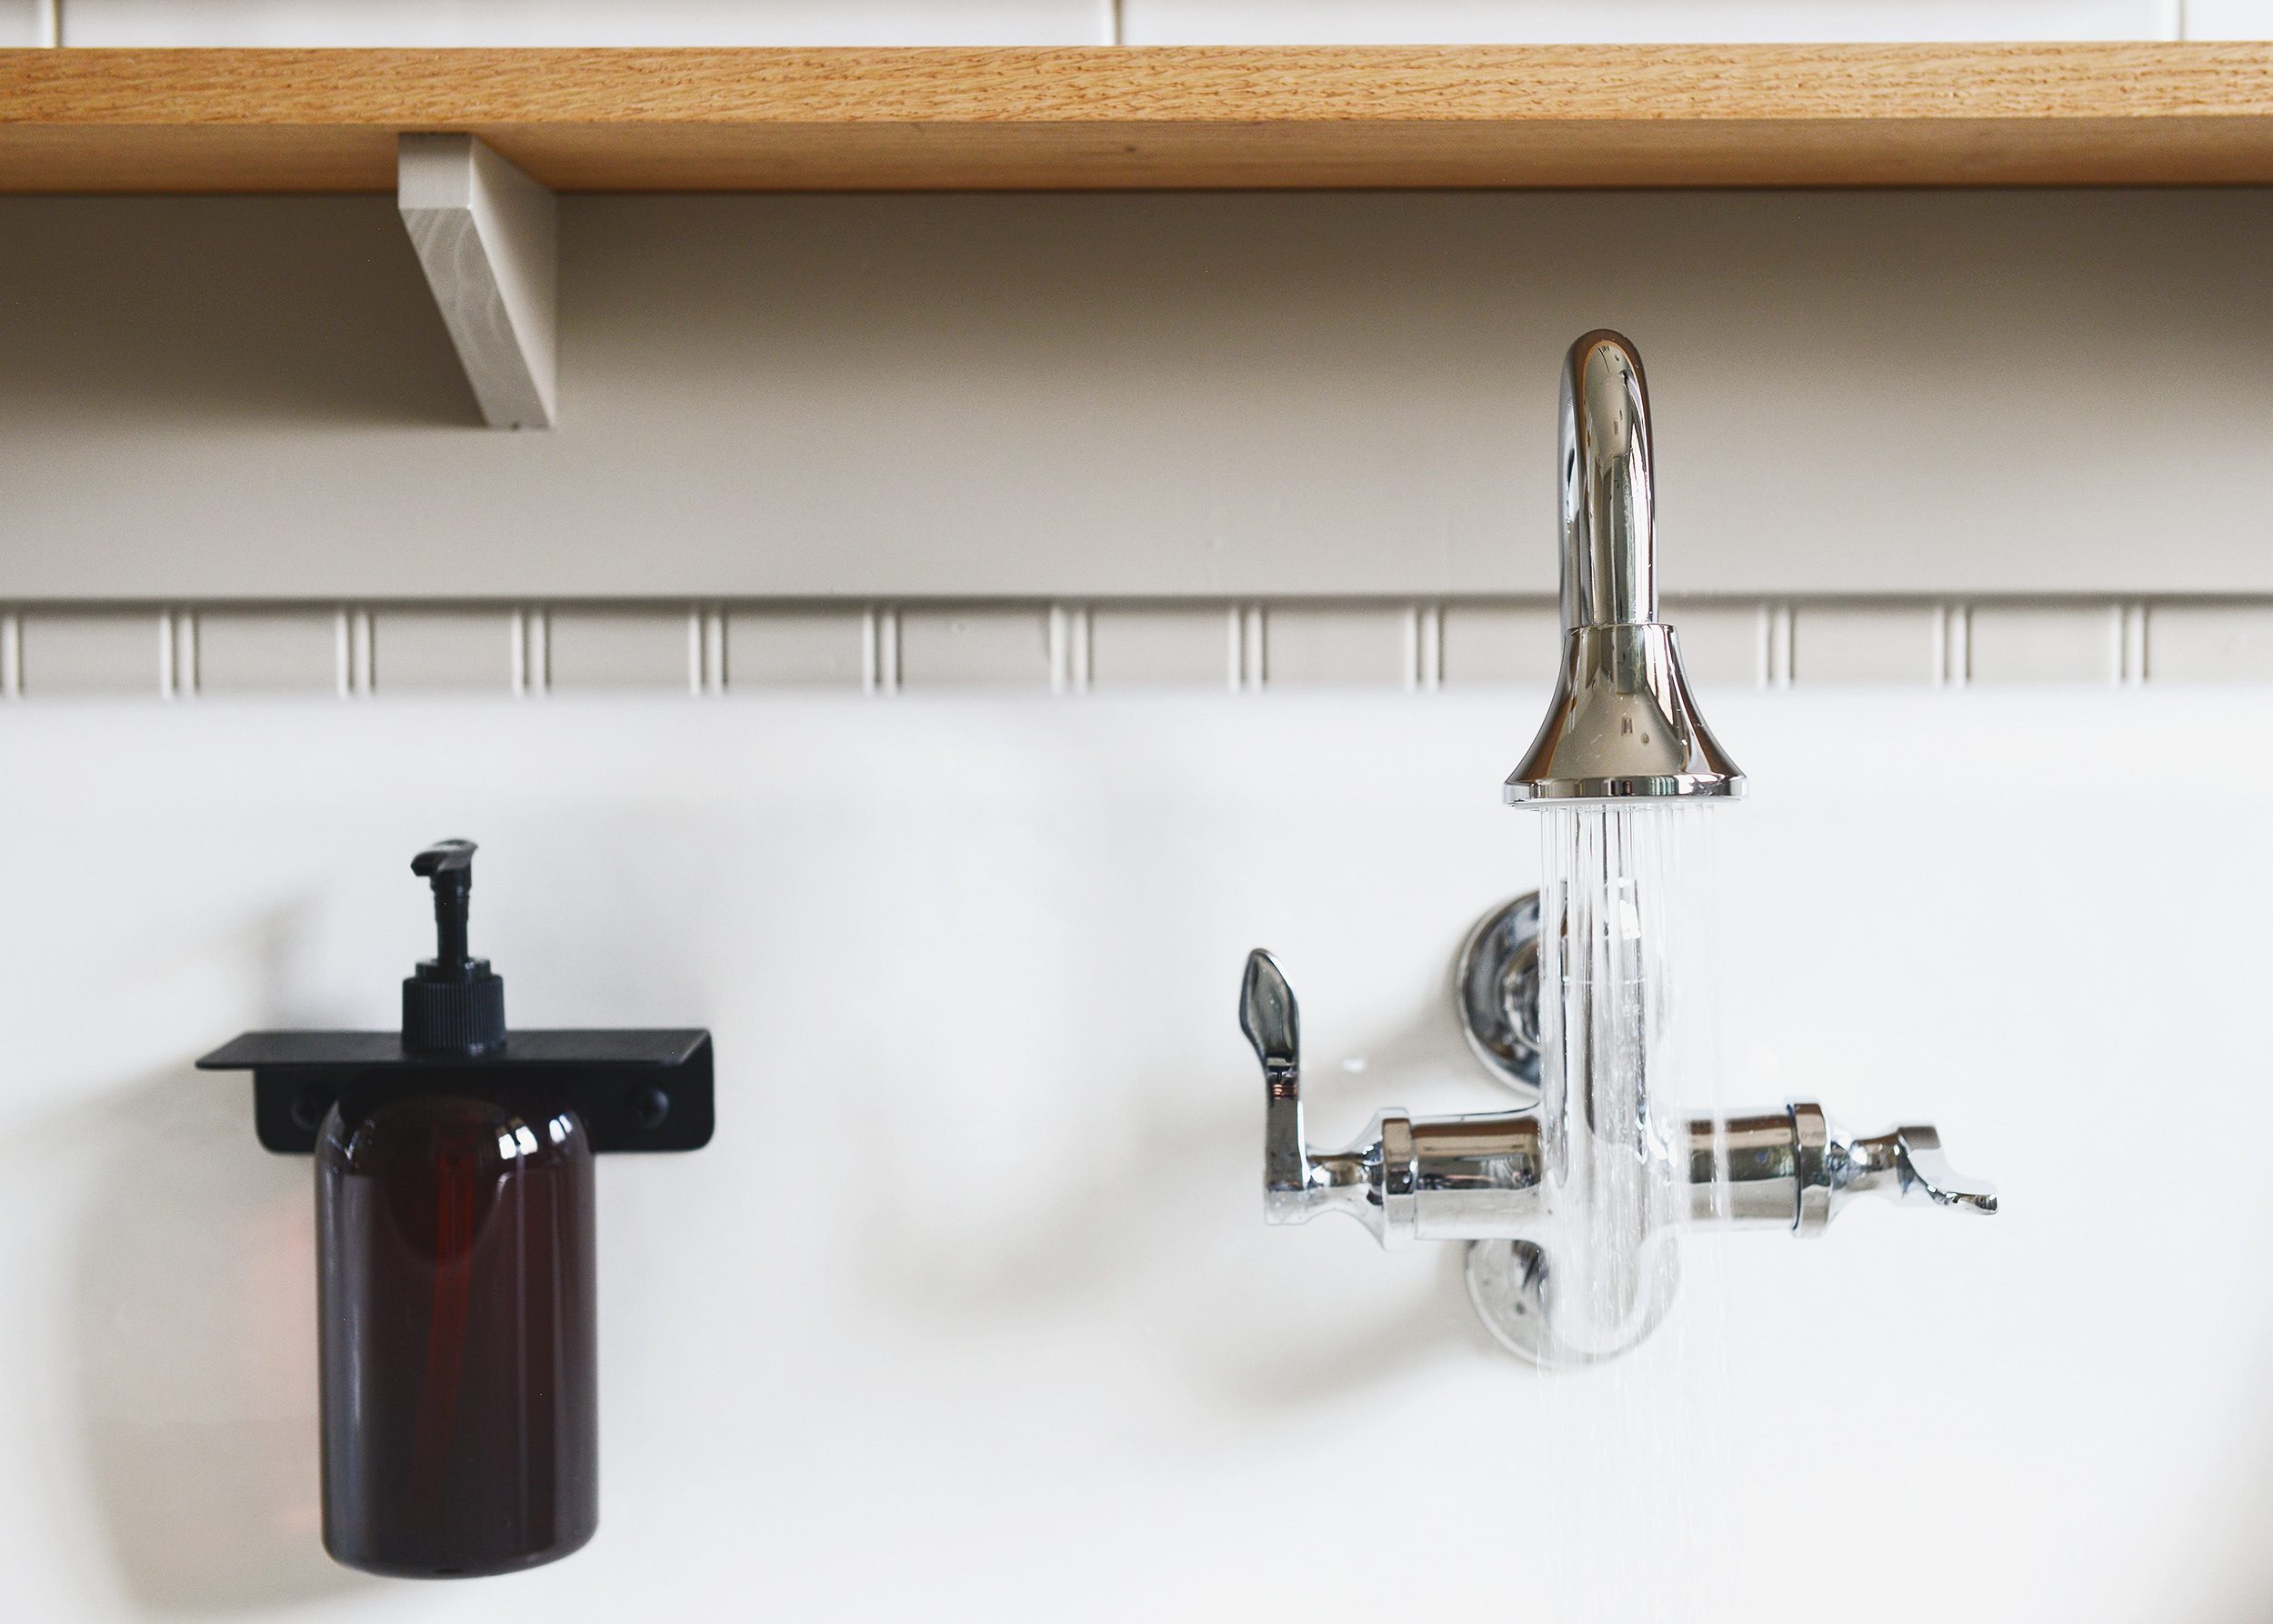 Kohler Brockway sink and Triton Bowe faucets in polished chrome | via Yellow Brick Home